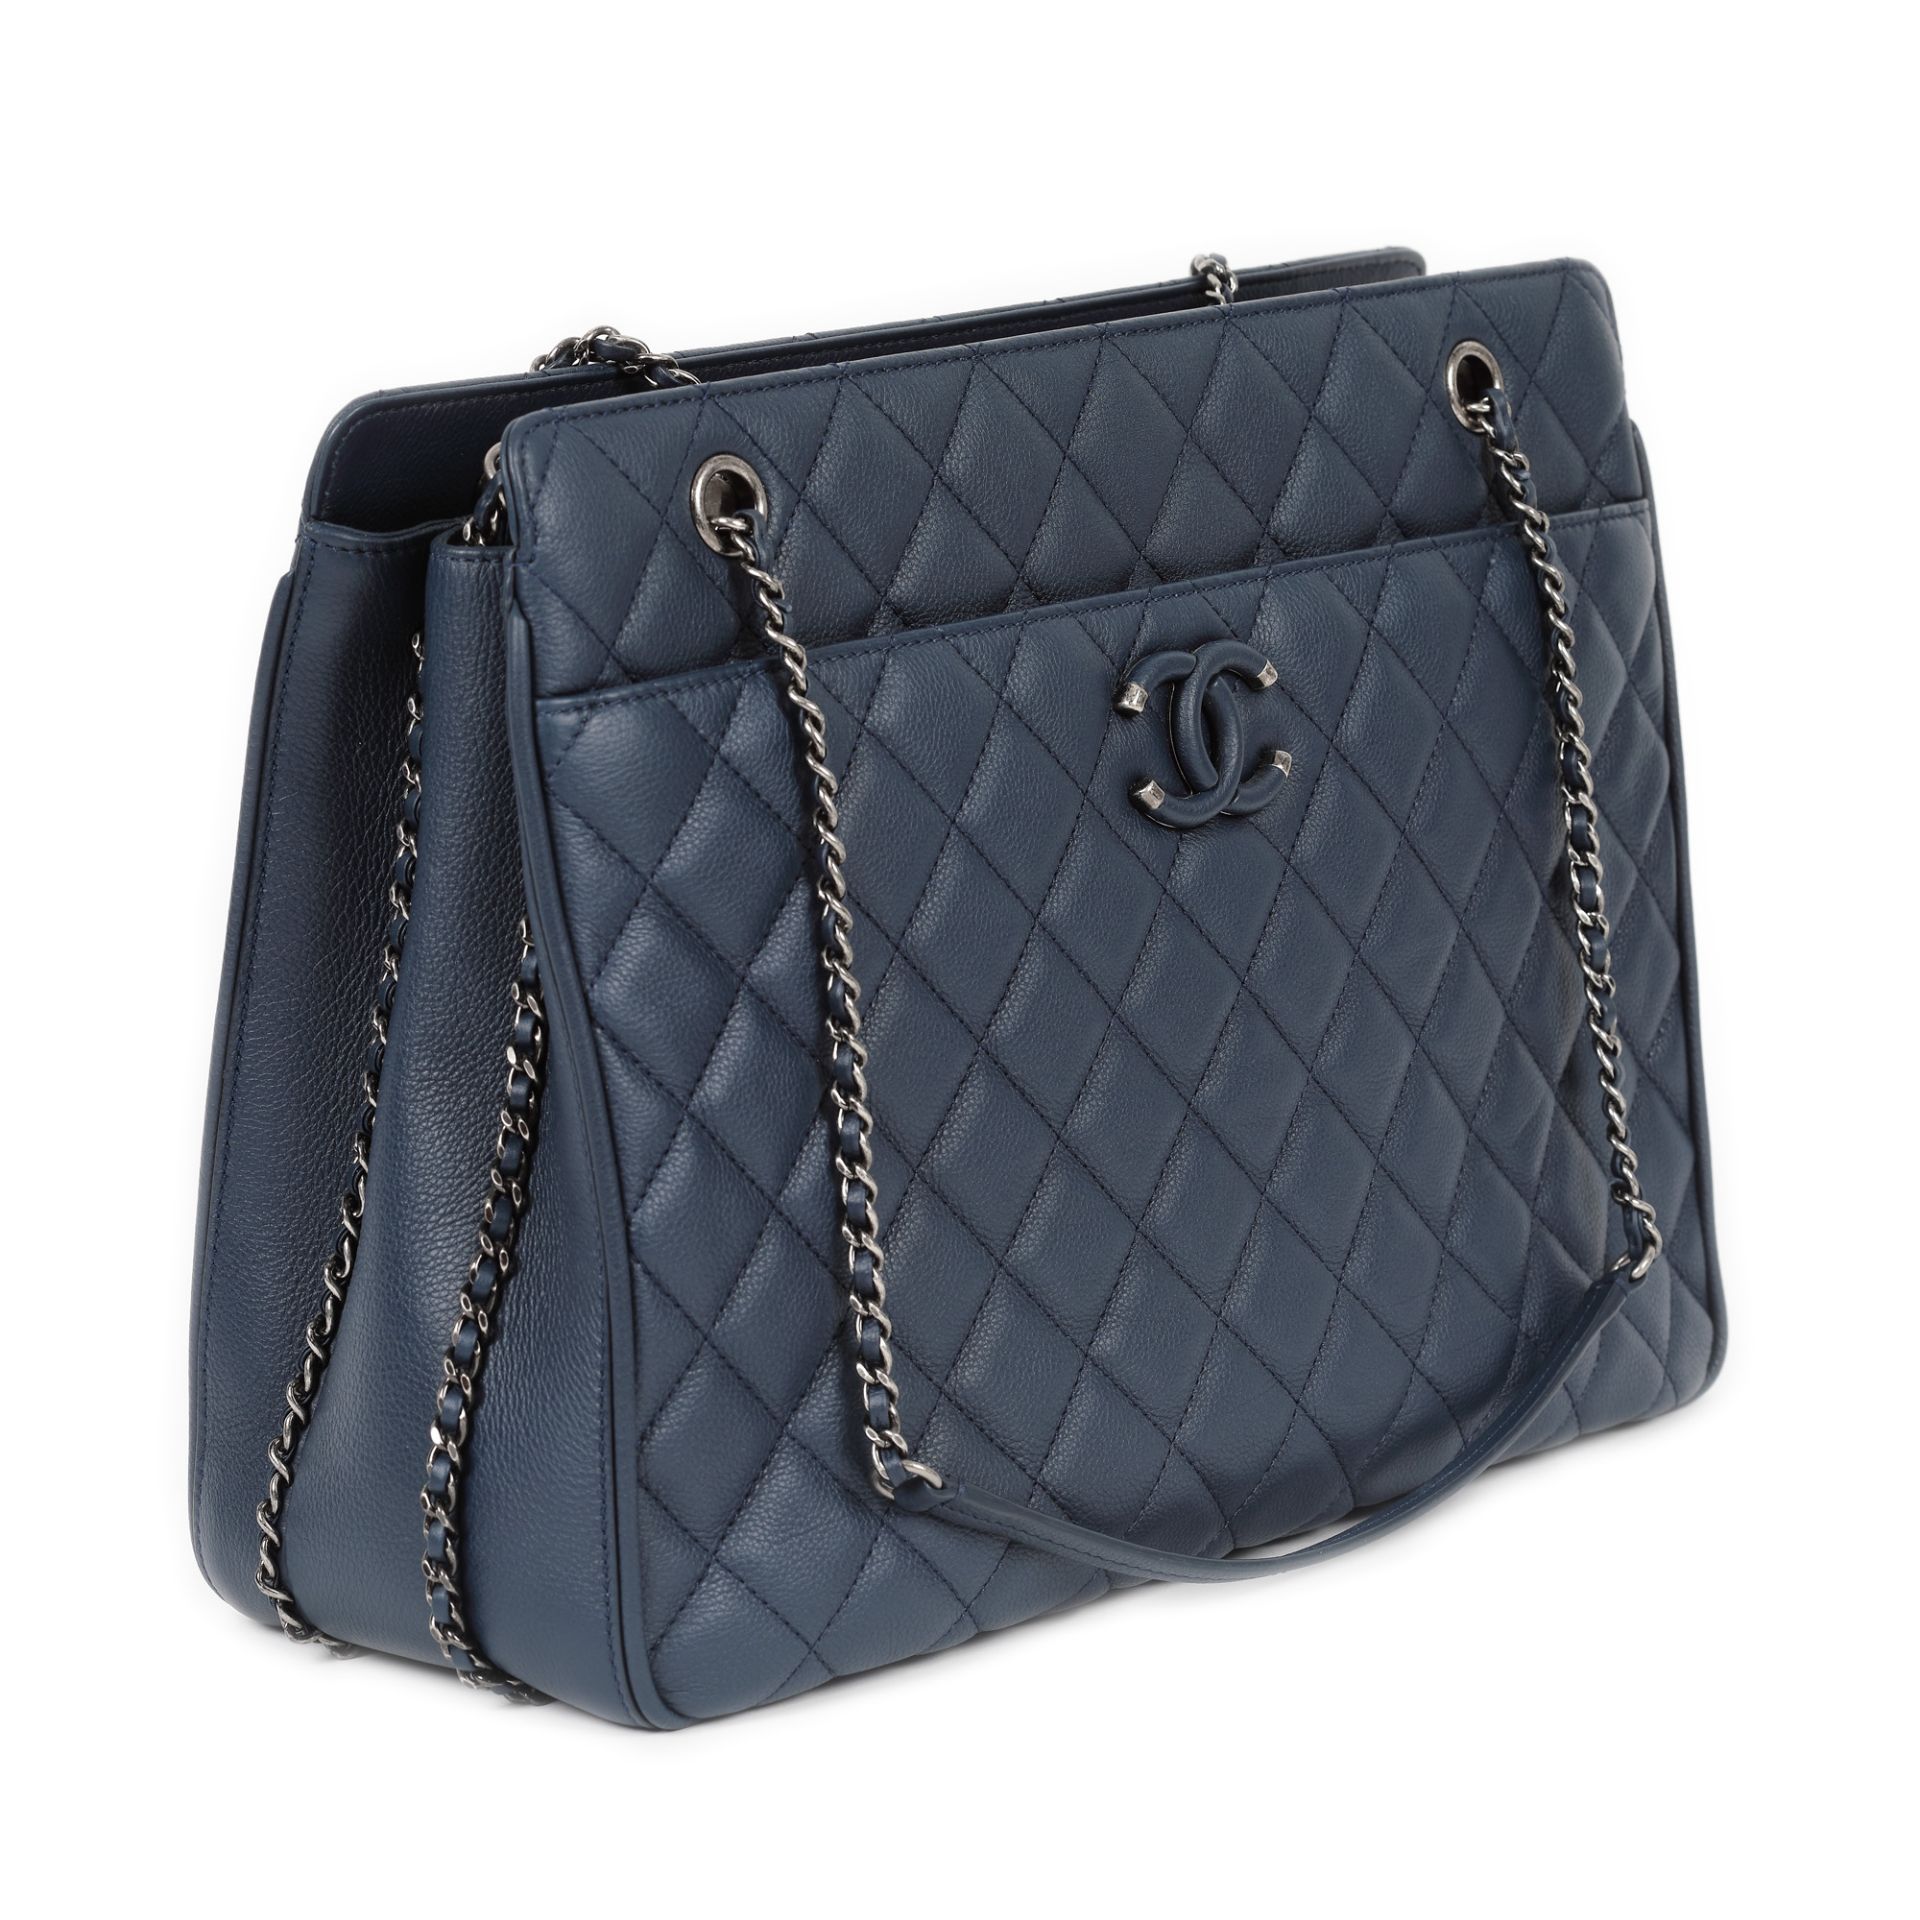 Chanel bag, quilted leather, blue, authenticity card and original cover - Image 2 of 5